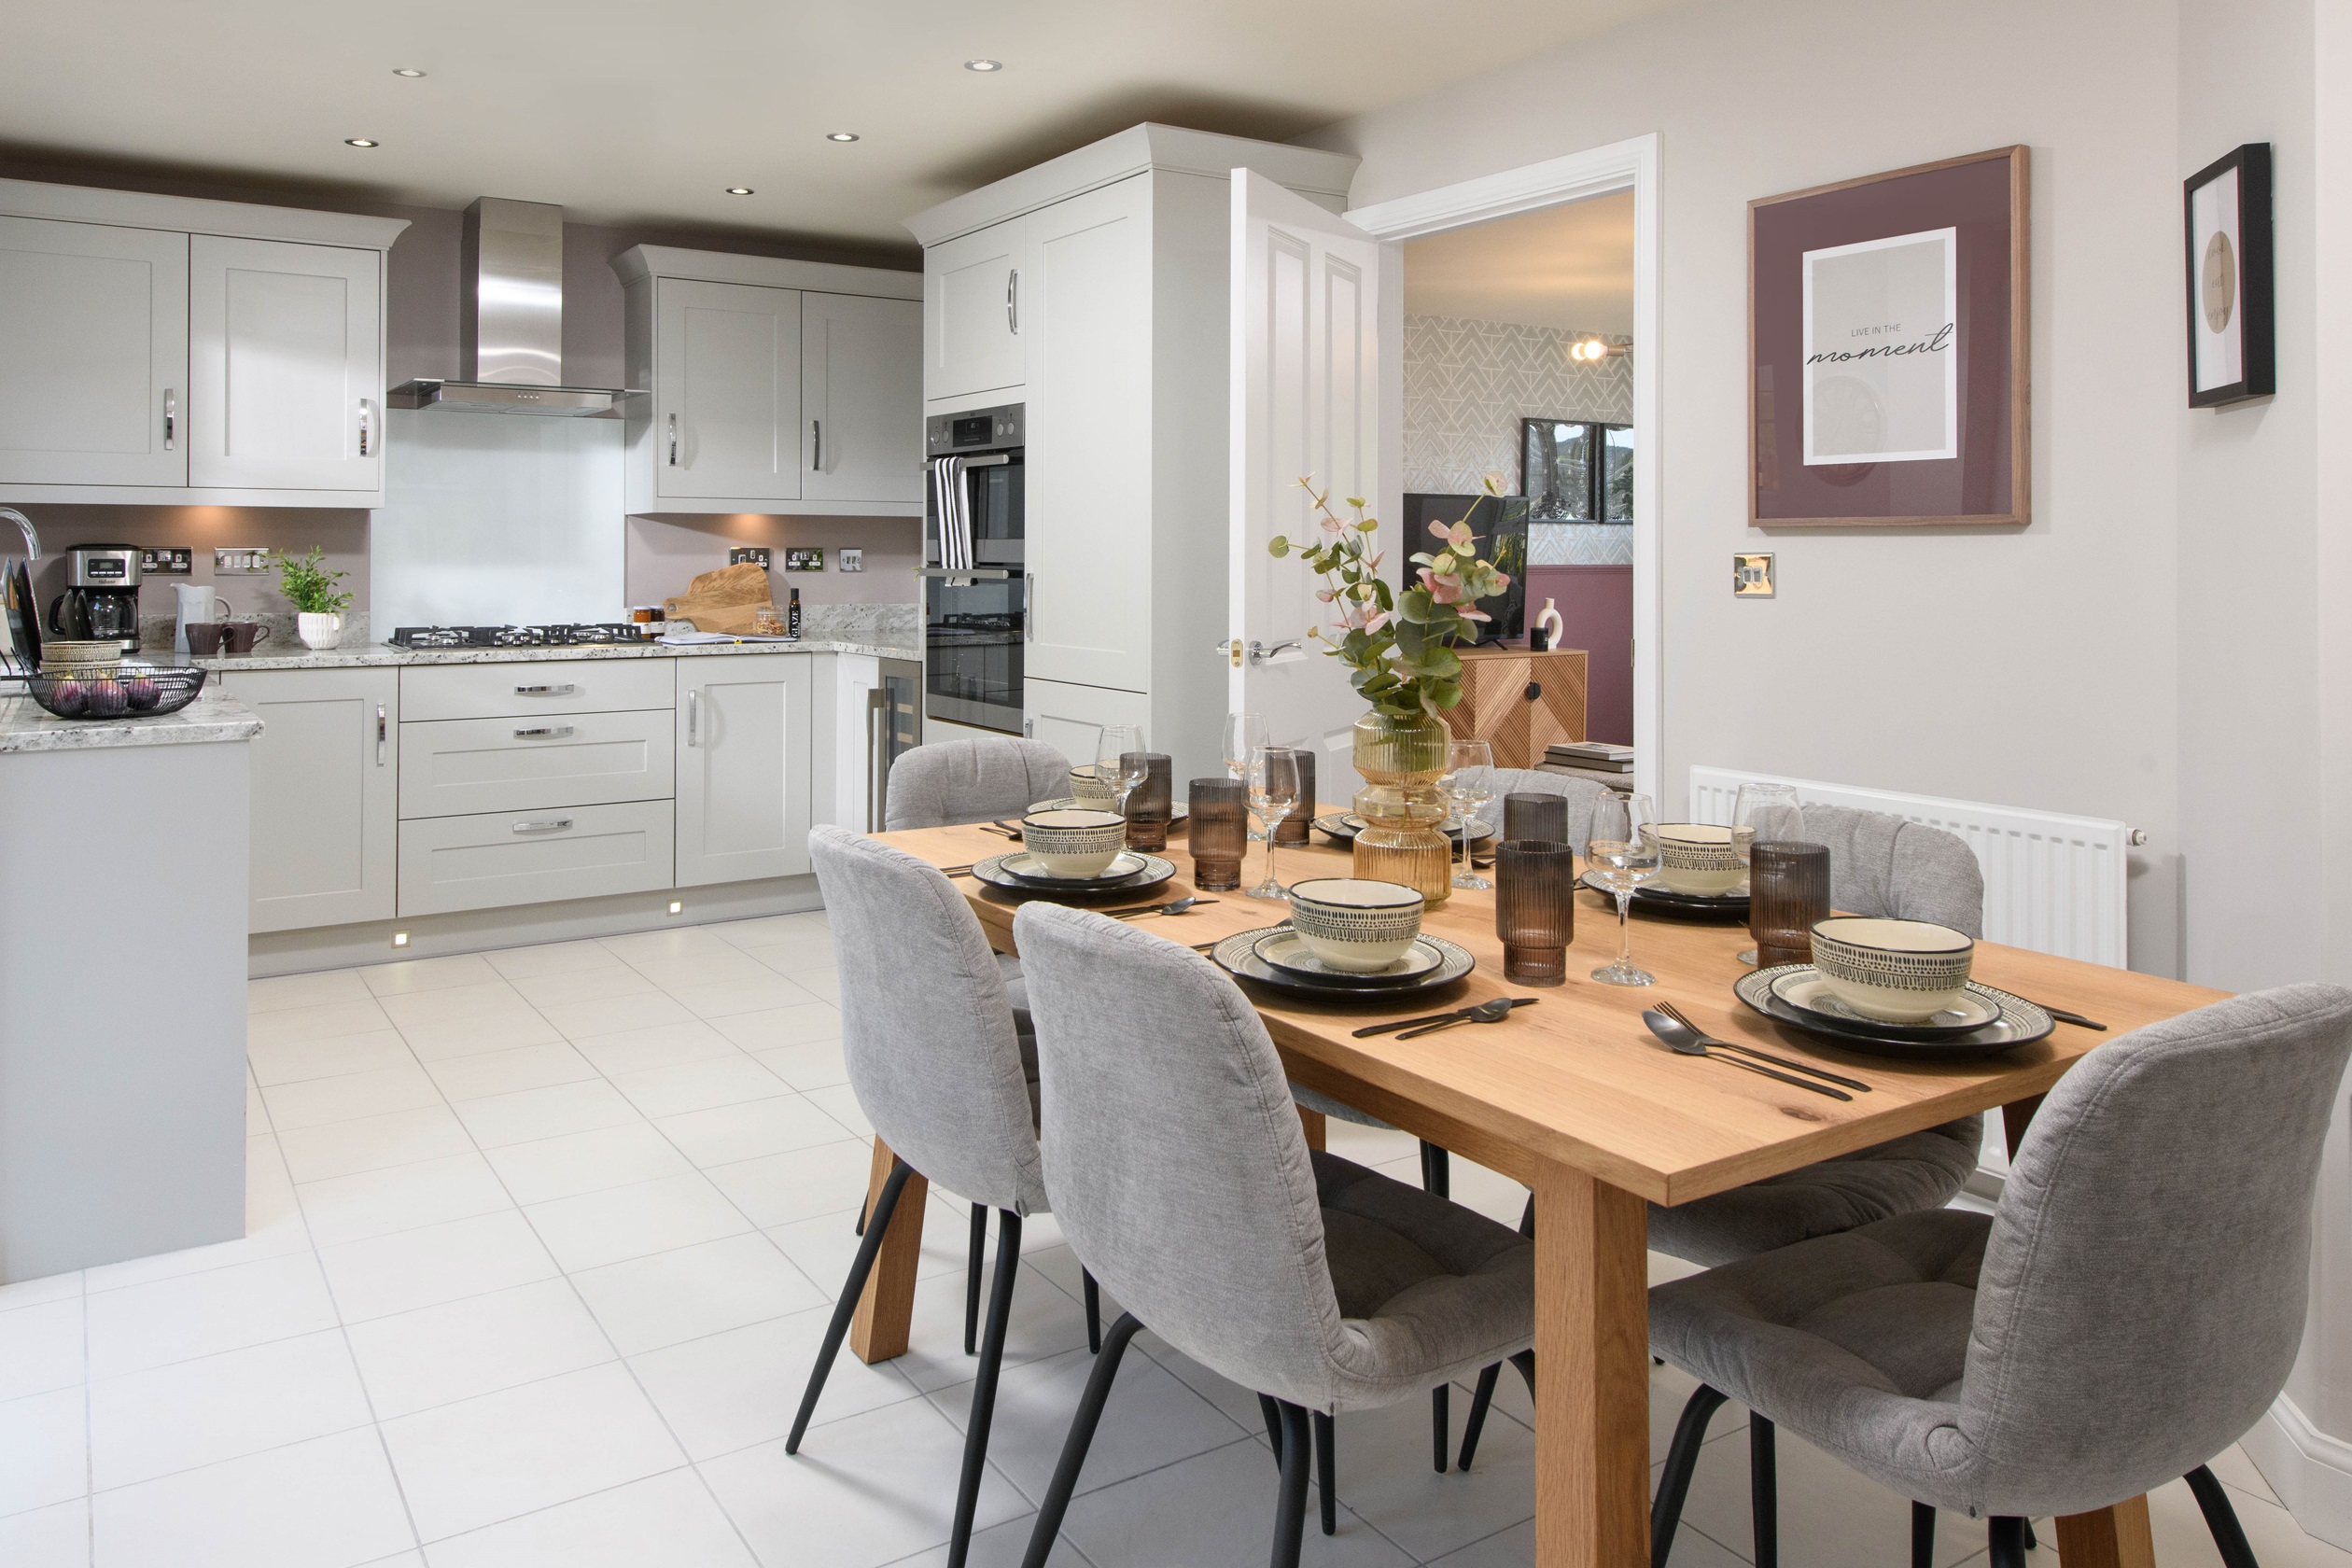 Property 2 of 10. The Mews Windermere Dining Kitchen